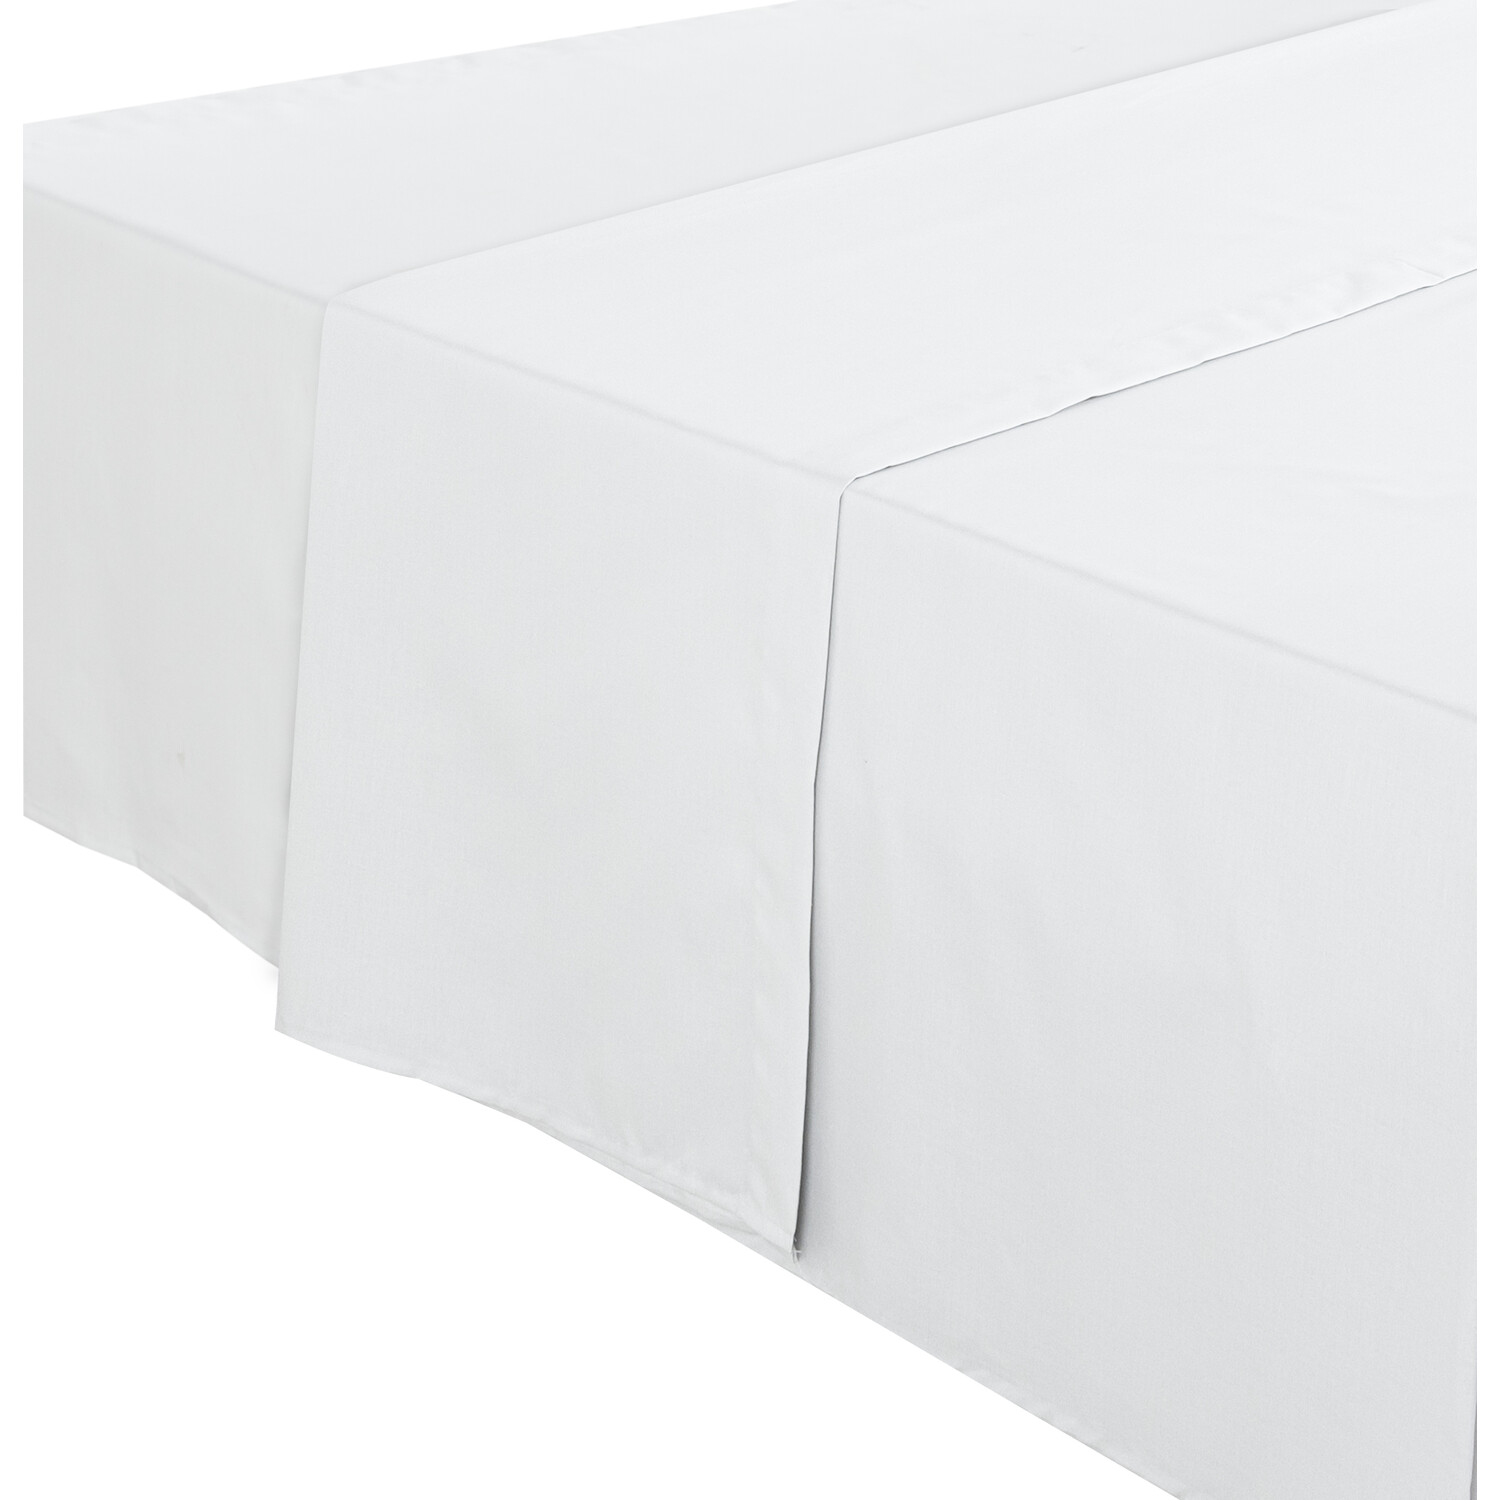 My Home Double White Flat Bedsheet Image 3